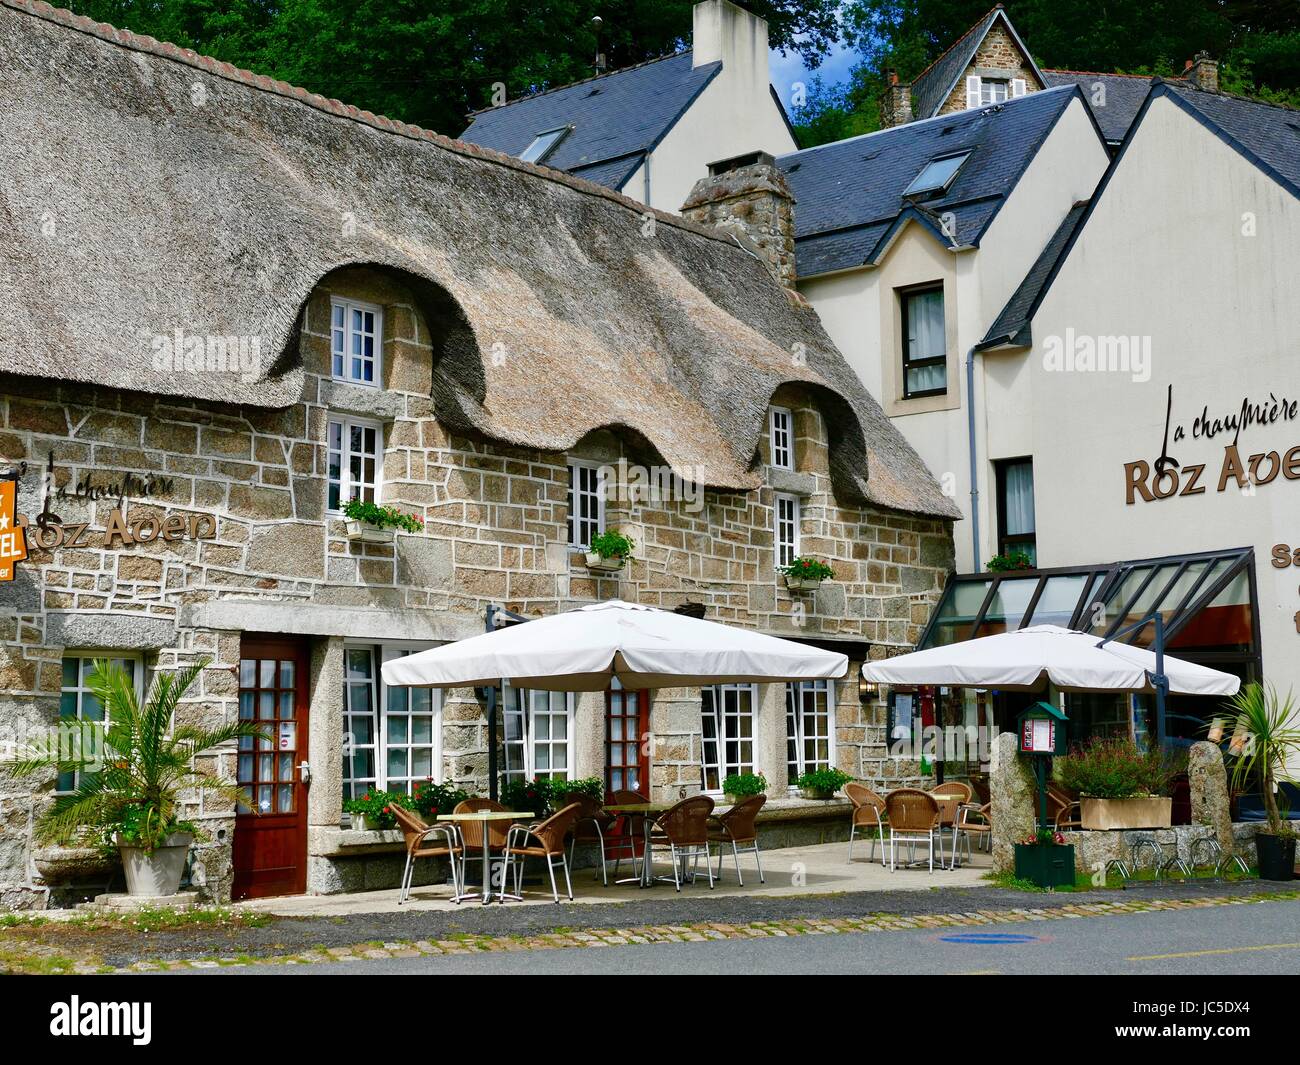 La Chaumière Roz Aven Hôtel, a charming hotel in a 16th century building with a thatched roof, Pont-Aven, Brittany, France. Stock Photo